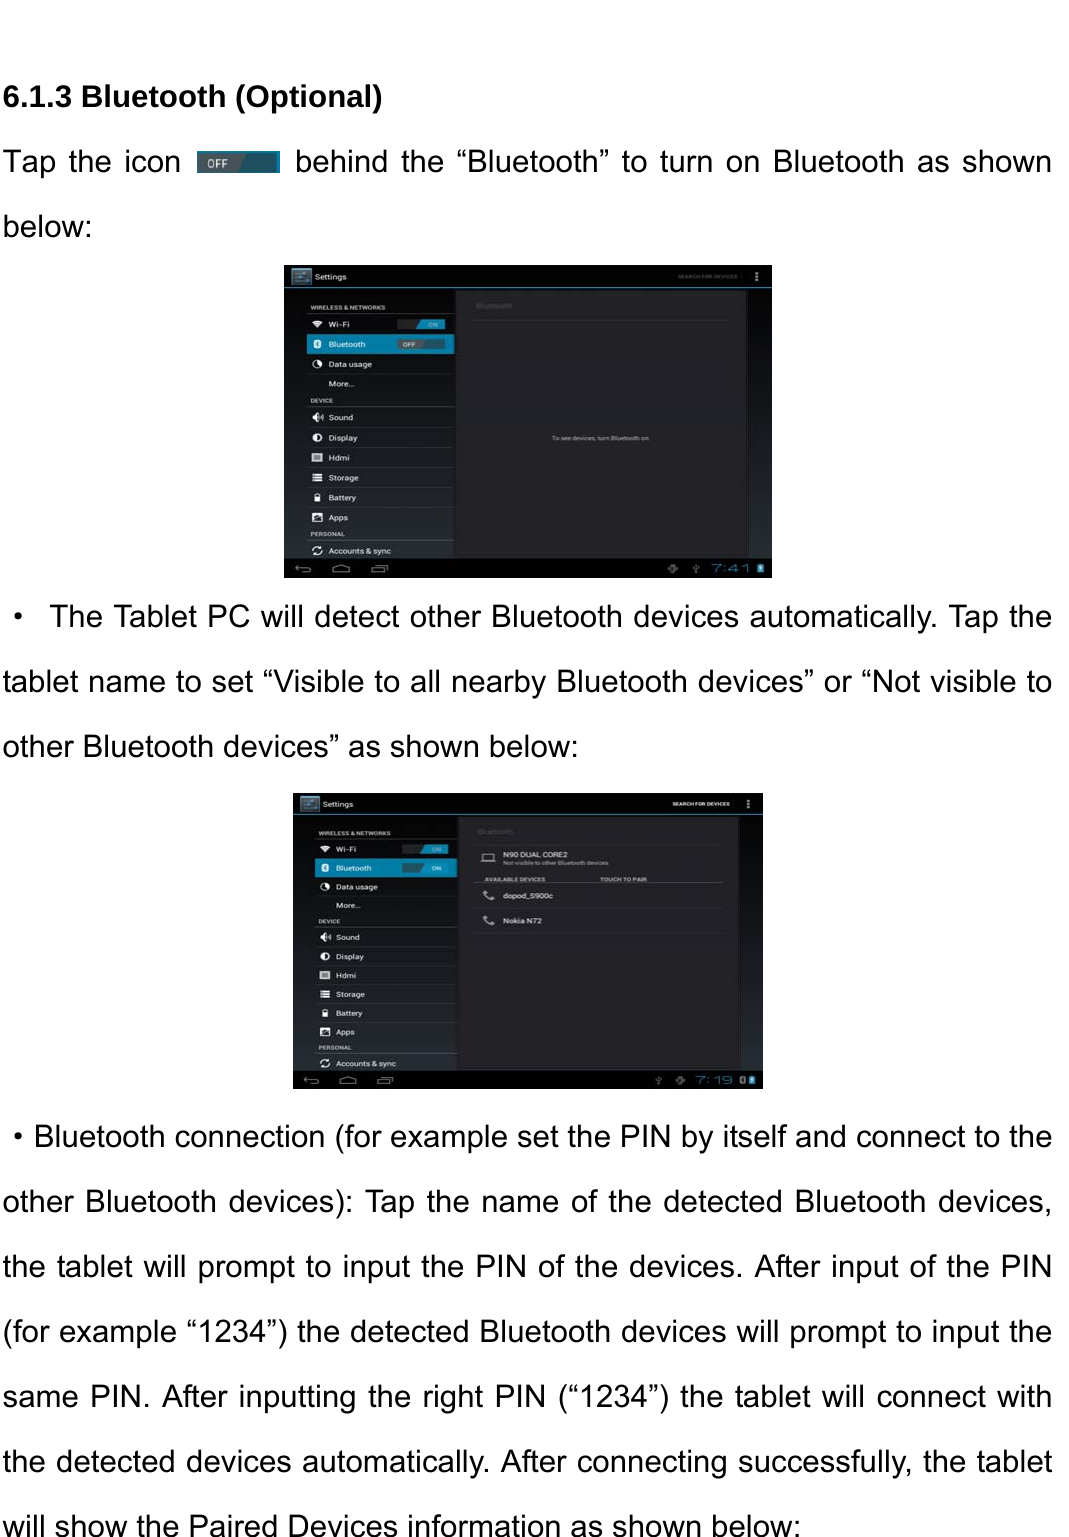    6.1.3 Bluetooth (Optional) Tap the icon   behind the “Bluetooth” to turn on Bluetooth as shown below:  ·  The Tablet PC will detect other Bluetooth devices automatically. Tap the tablet name to set “Visible to all nearby Bluetooth devices” or “Not visible to other Bluetooth devices” as shown below:    ·Bluetooth connection (for example set the PIN by itself and connect to the other Bluetooth devices): Tap the name of the detected Bluetooth devices, the tablet will prompt to input the PIN of the devices. After input of the PIN (for example “1234”) the detected Bluetooth devices will prompt to input the same PIN. After inputting the right PIN (“1234”) the tablet will connect with the detected devices automatically. After connecting successfully, the tablet will show the Paired Devices information as shown below:   